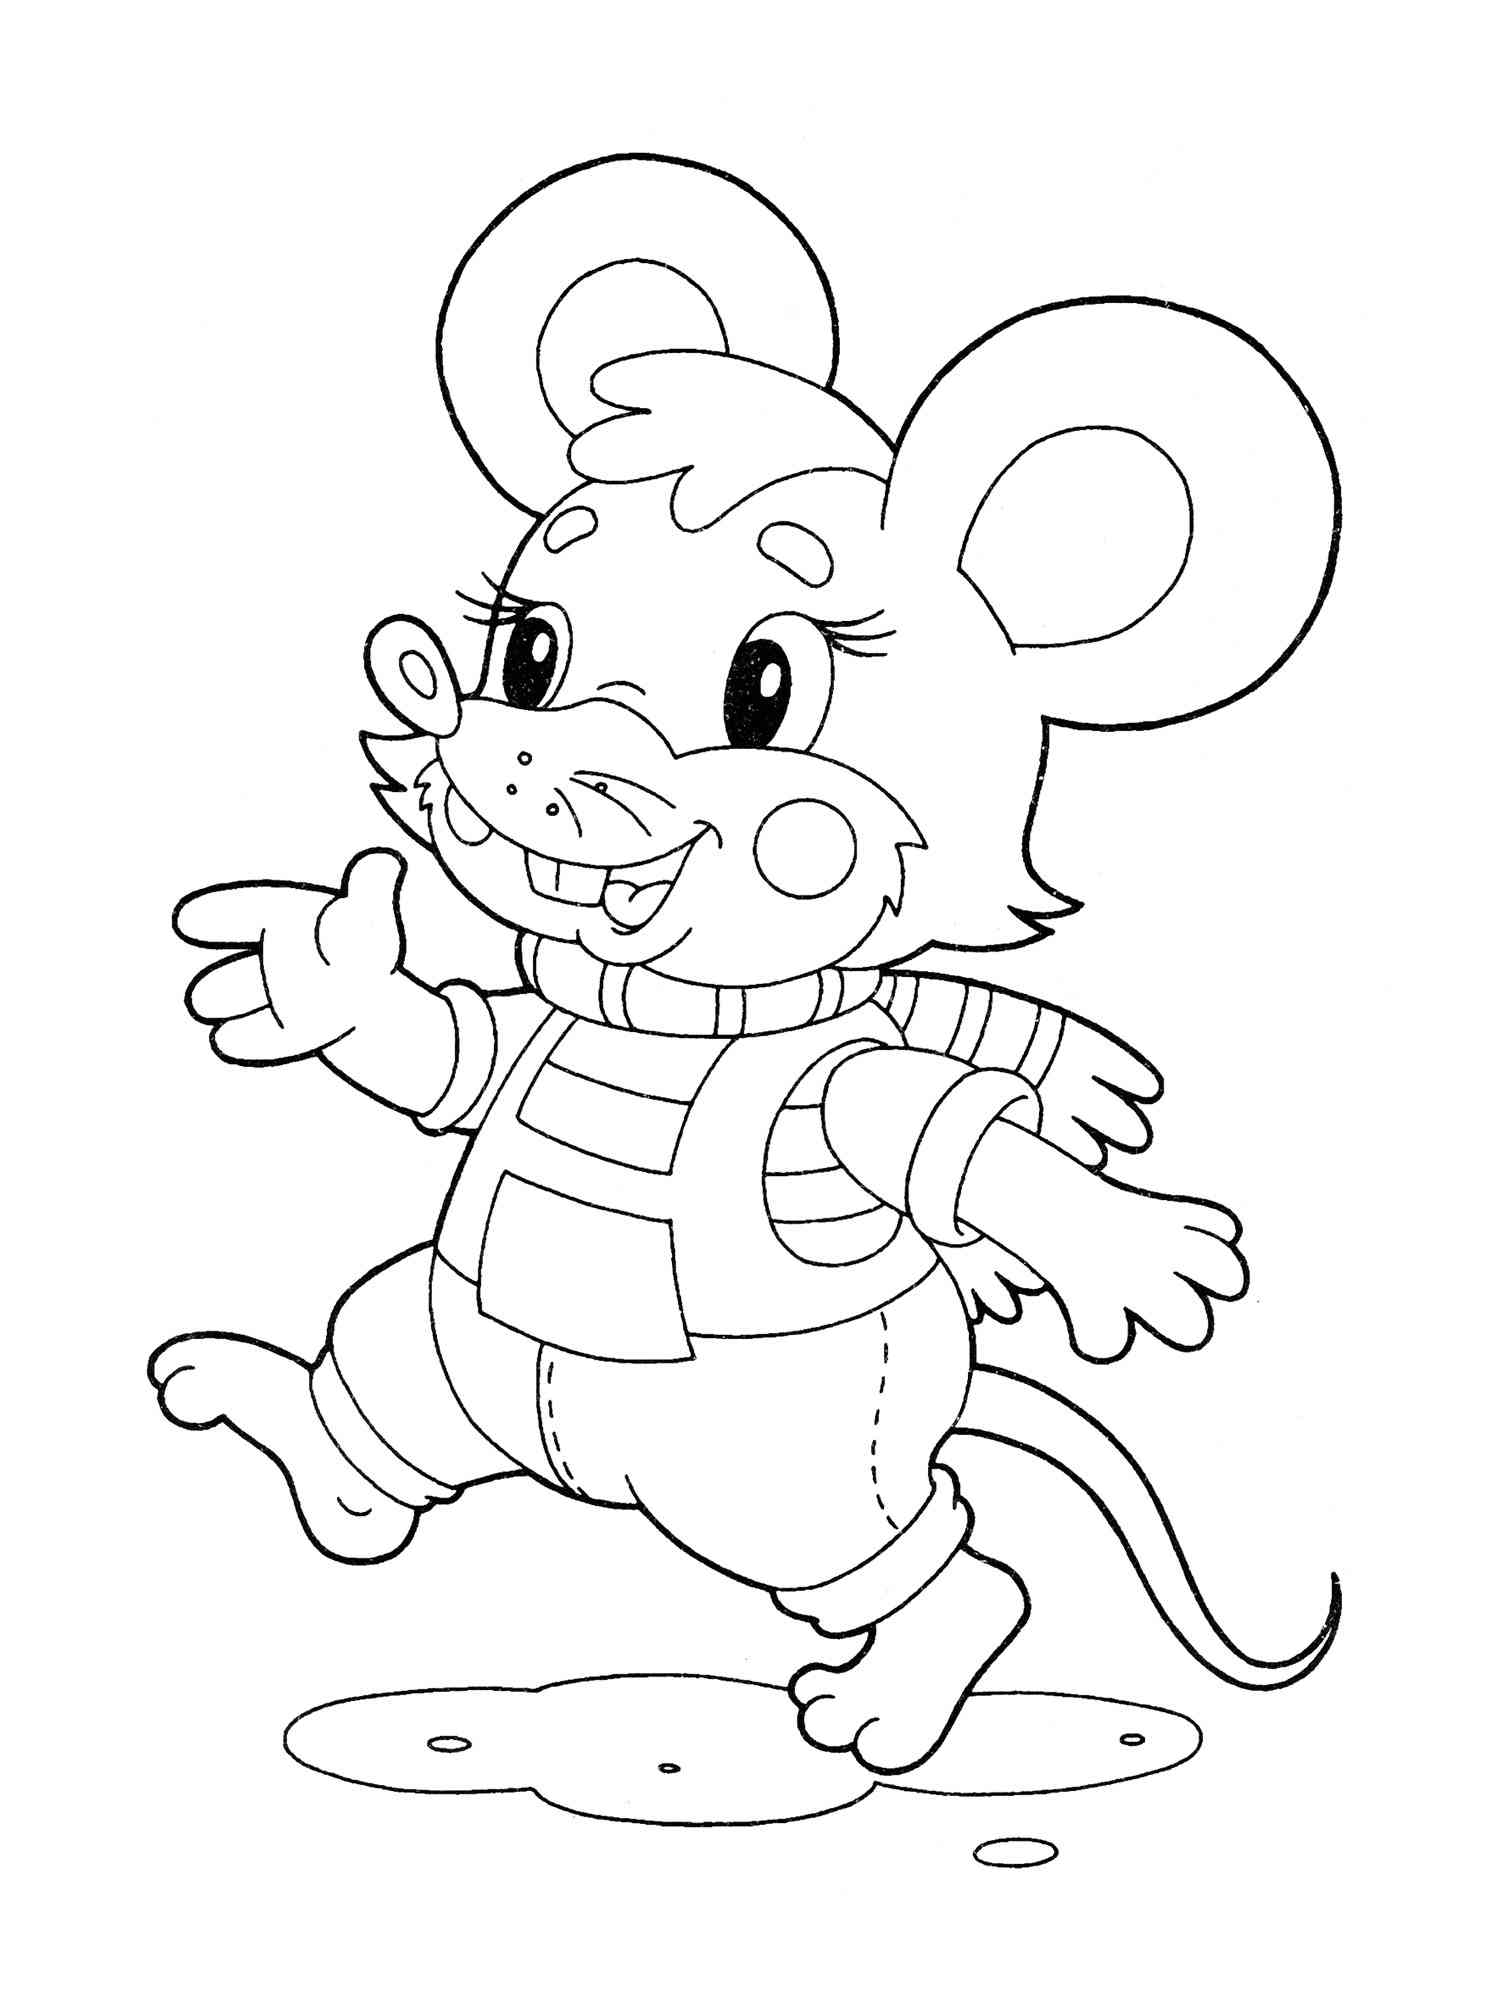 Mouse in a scarf coloring page